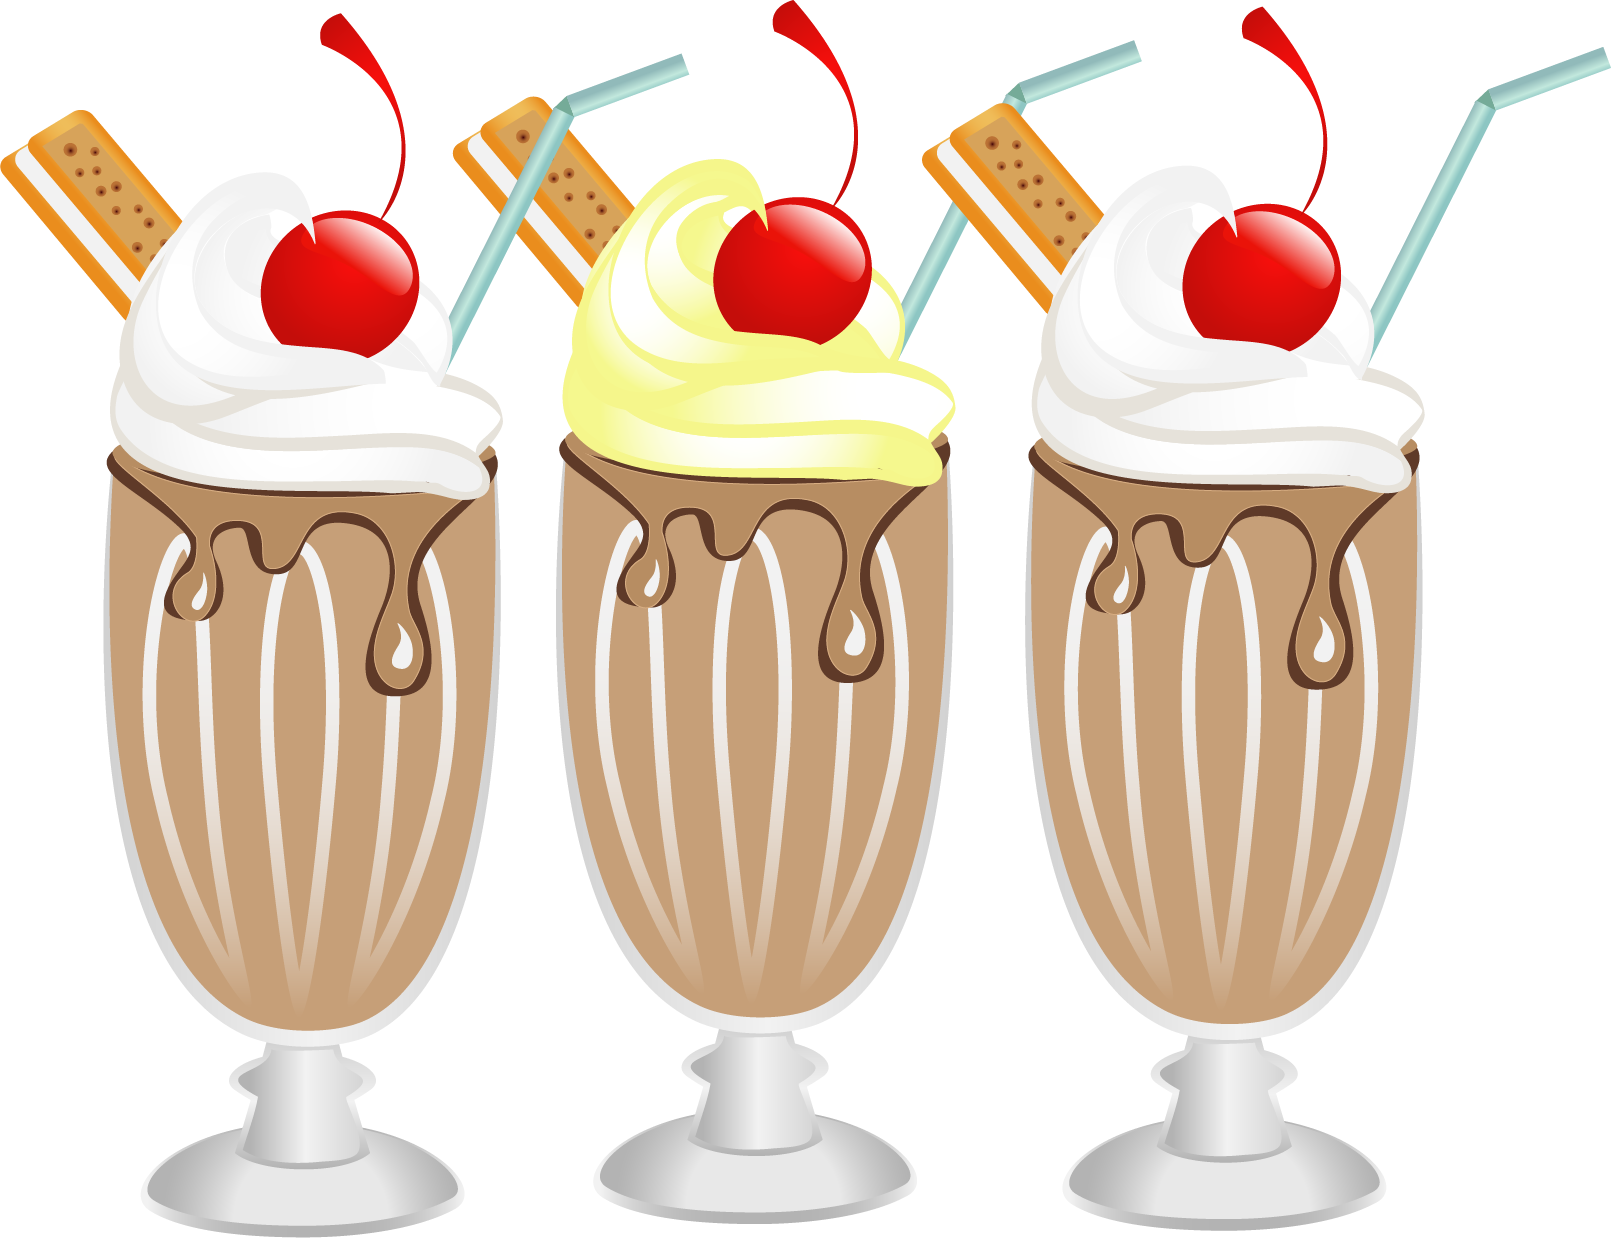 Whipped Cream Download Free Image PNG Image